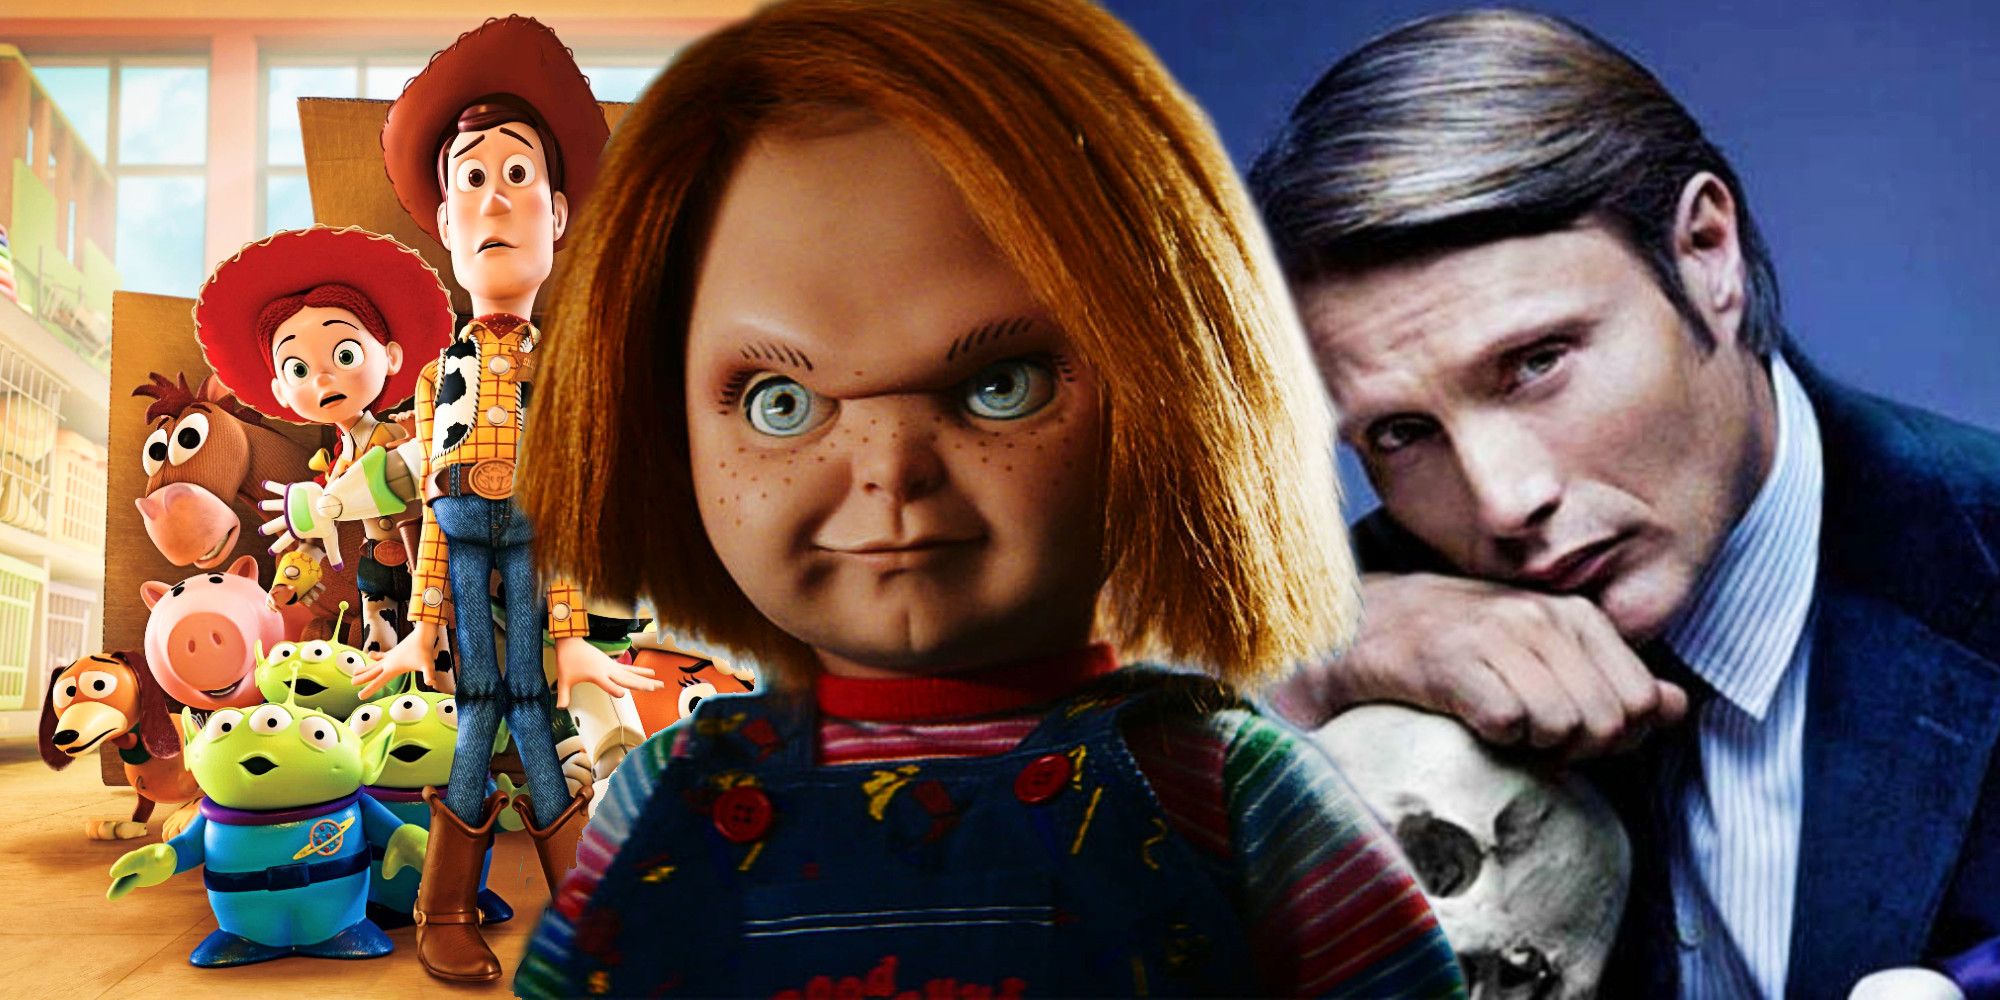 Mads Mikkelsen as Hannibal, Brad Dourif as Chucky, and the Toy Story 3 Poster